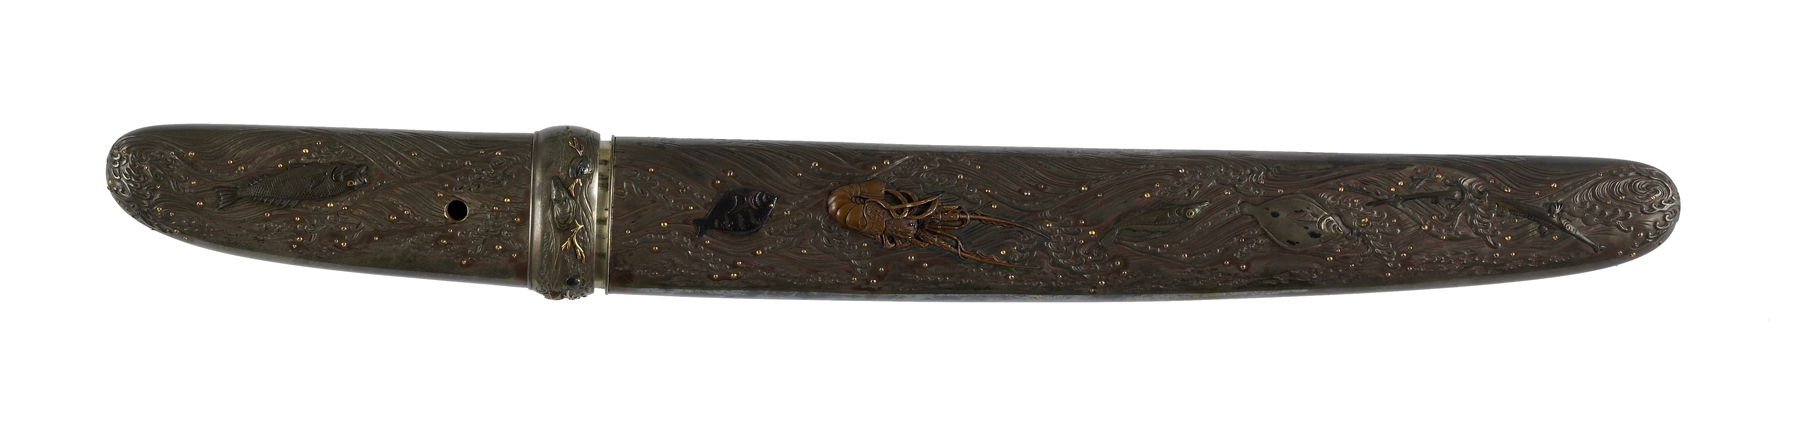 Image for Dagger (aikuchi) with sea life among waves (includes 51.1197.1-51.1197.3)